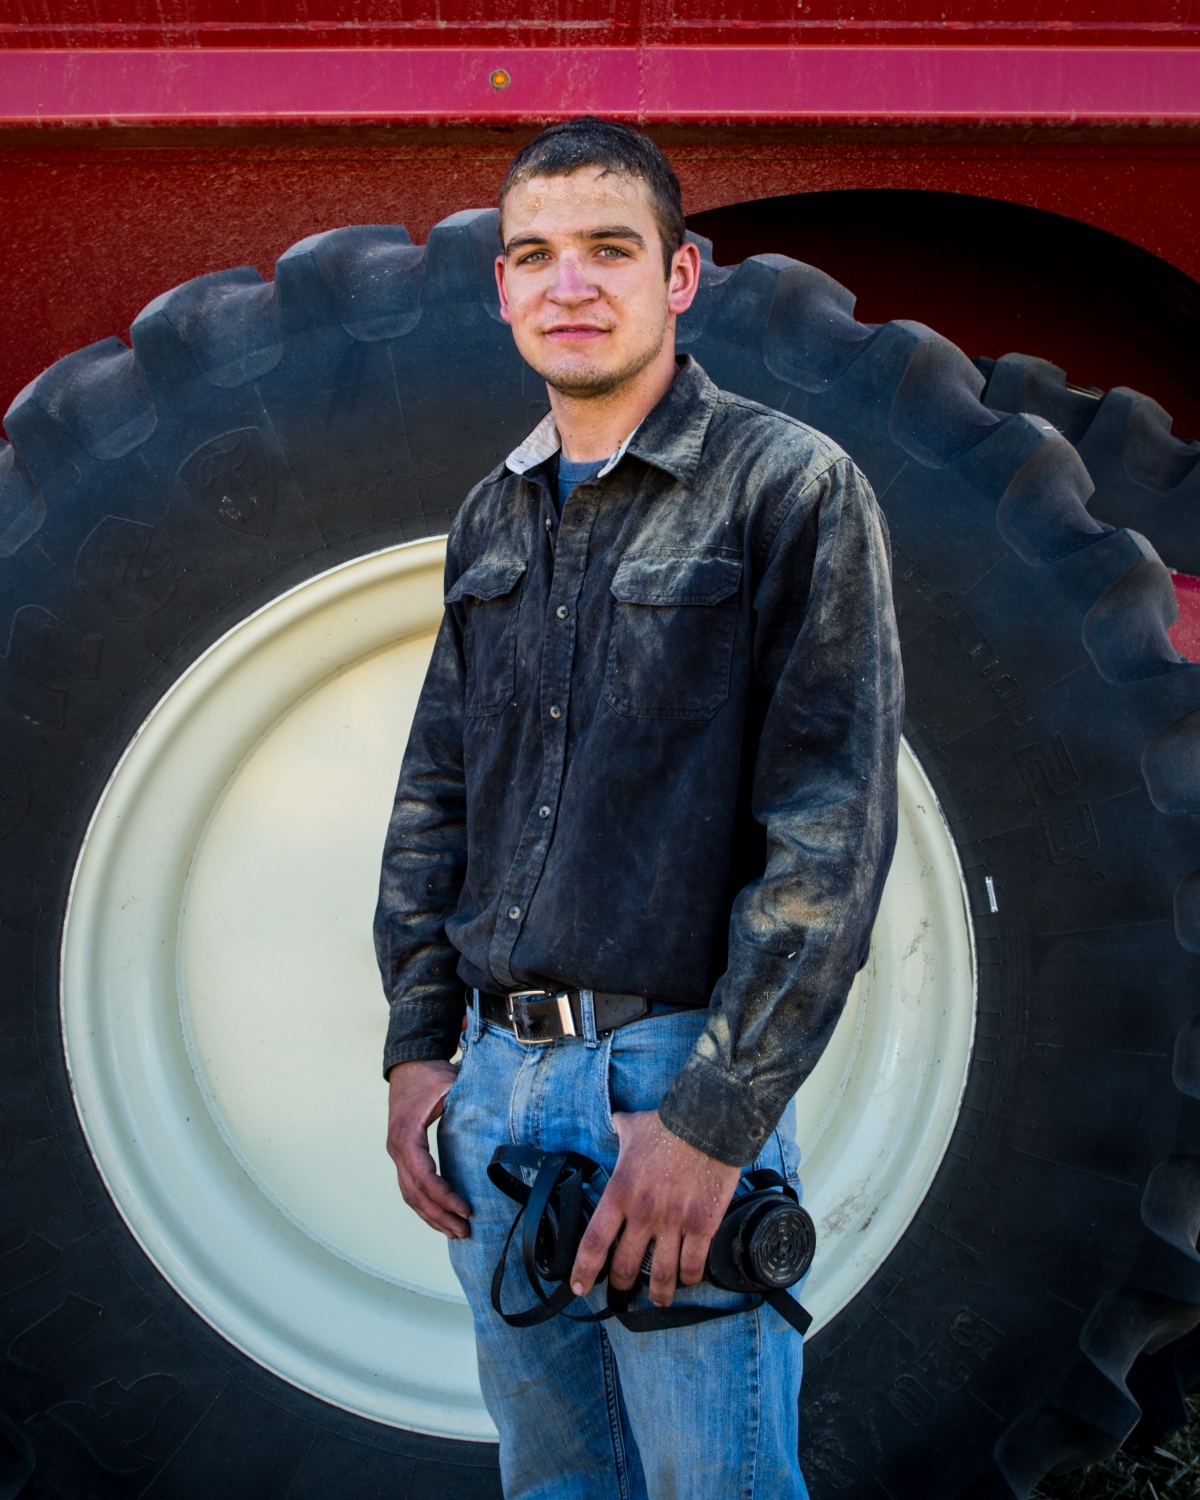 Harvesters -  Alan Stoner, 21, is currently a full-time harvester and...